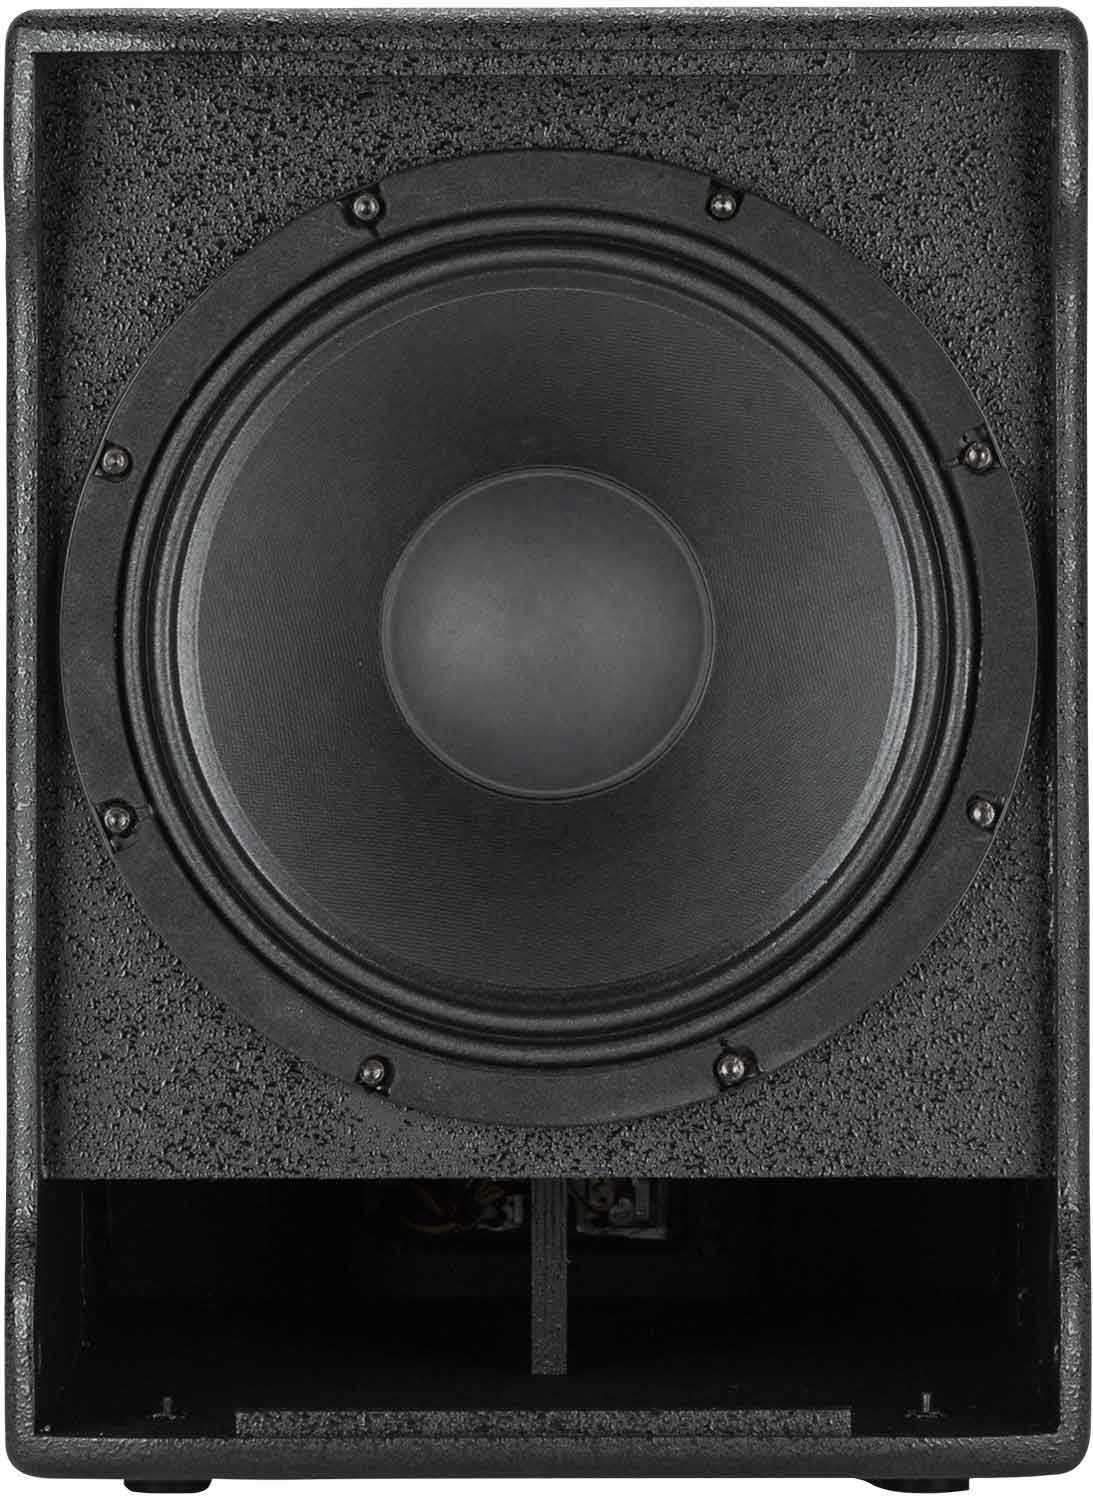 RCF Sub 702-AS MKII Powered 12-Inch Subwoofer - PSSL ProSound and Stage Lighting